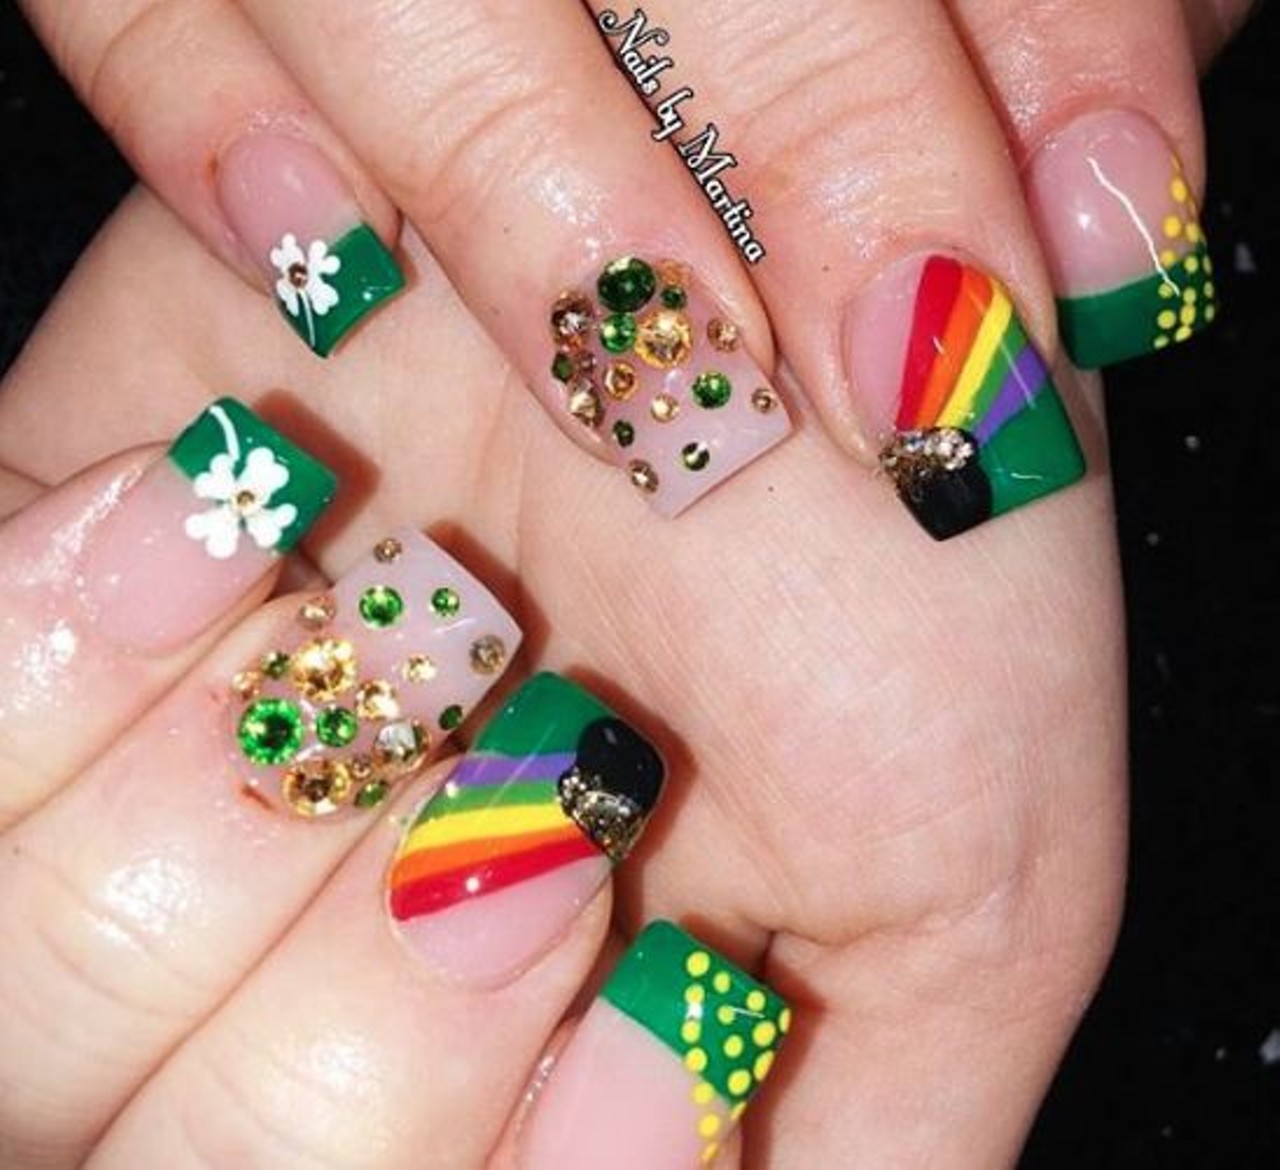  martinasnails_
(216) 403-8287
Martina Cruz, owner of the new nail salon Nails By Martina, only takes online appointments, which you can make here. 
Photo via martinasnails_/Instagram